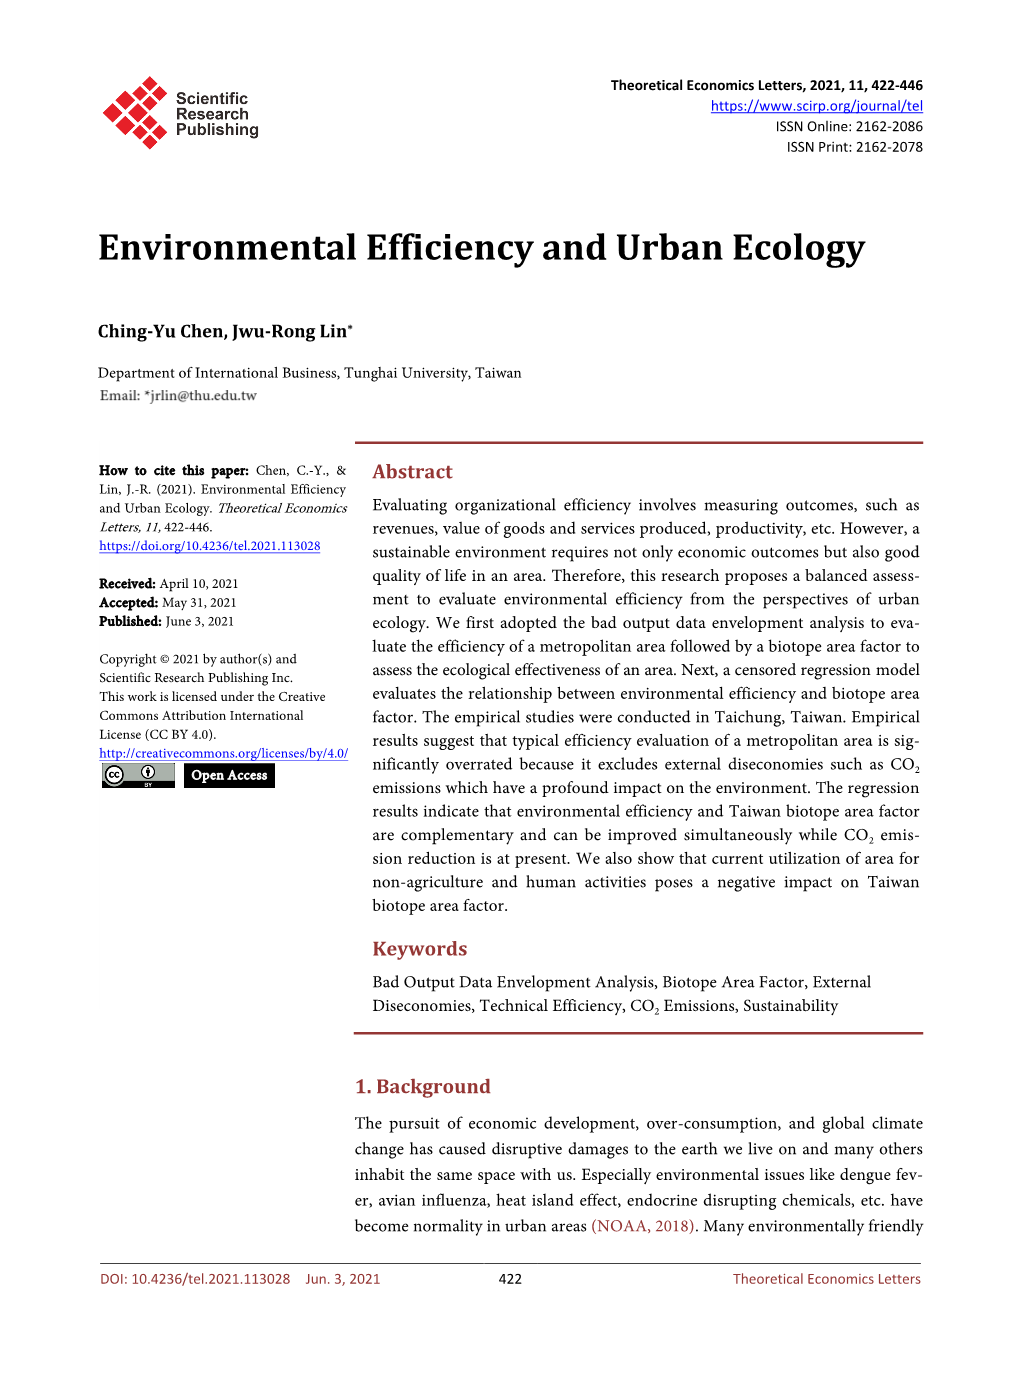 Environmental Efficiency and Urban Ecology